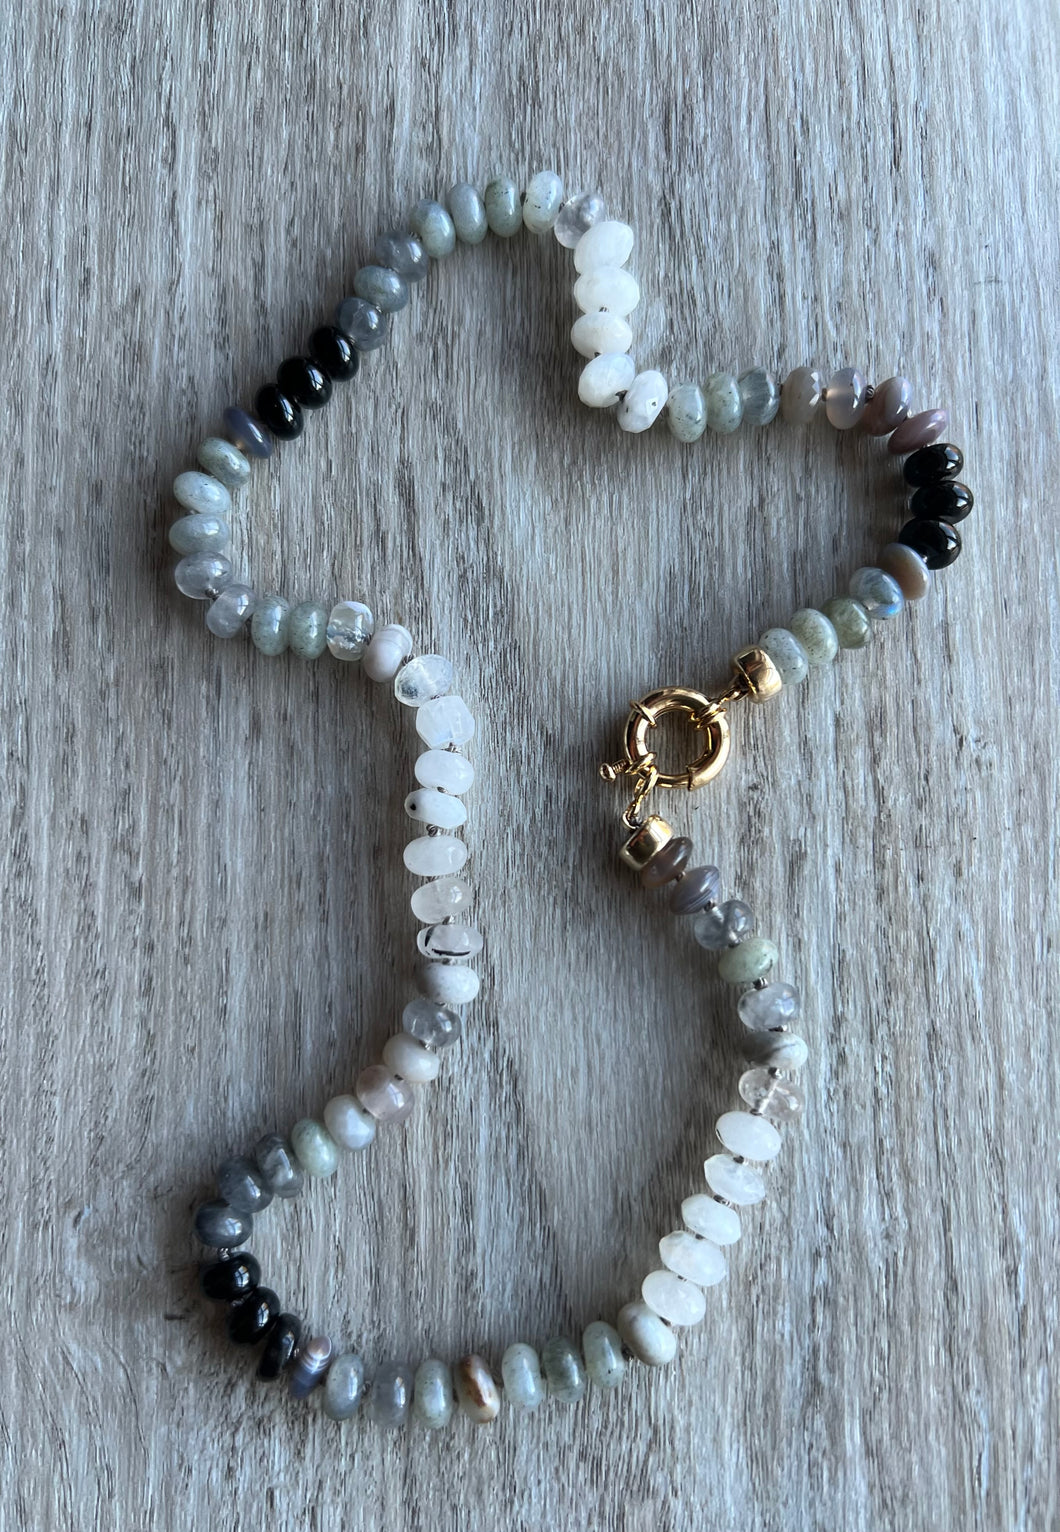 Inspired by a paint color way, this 20 inch beauty features moonstones, onyx,  labradorite and opals and is a gorgeous neutral piece to wear alone or as part of your favorite necklace stack   Finished off with gold filled end caps and a gold filled sailor's clasp